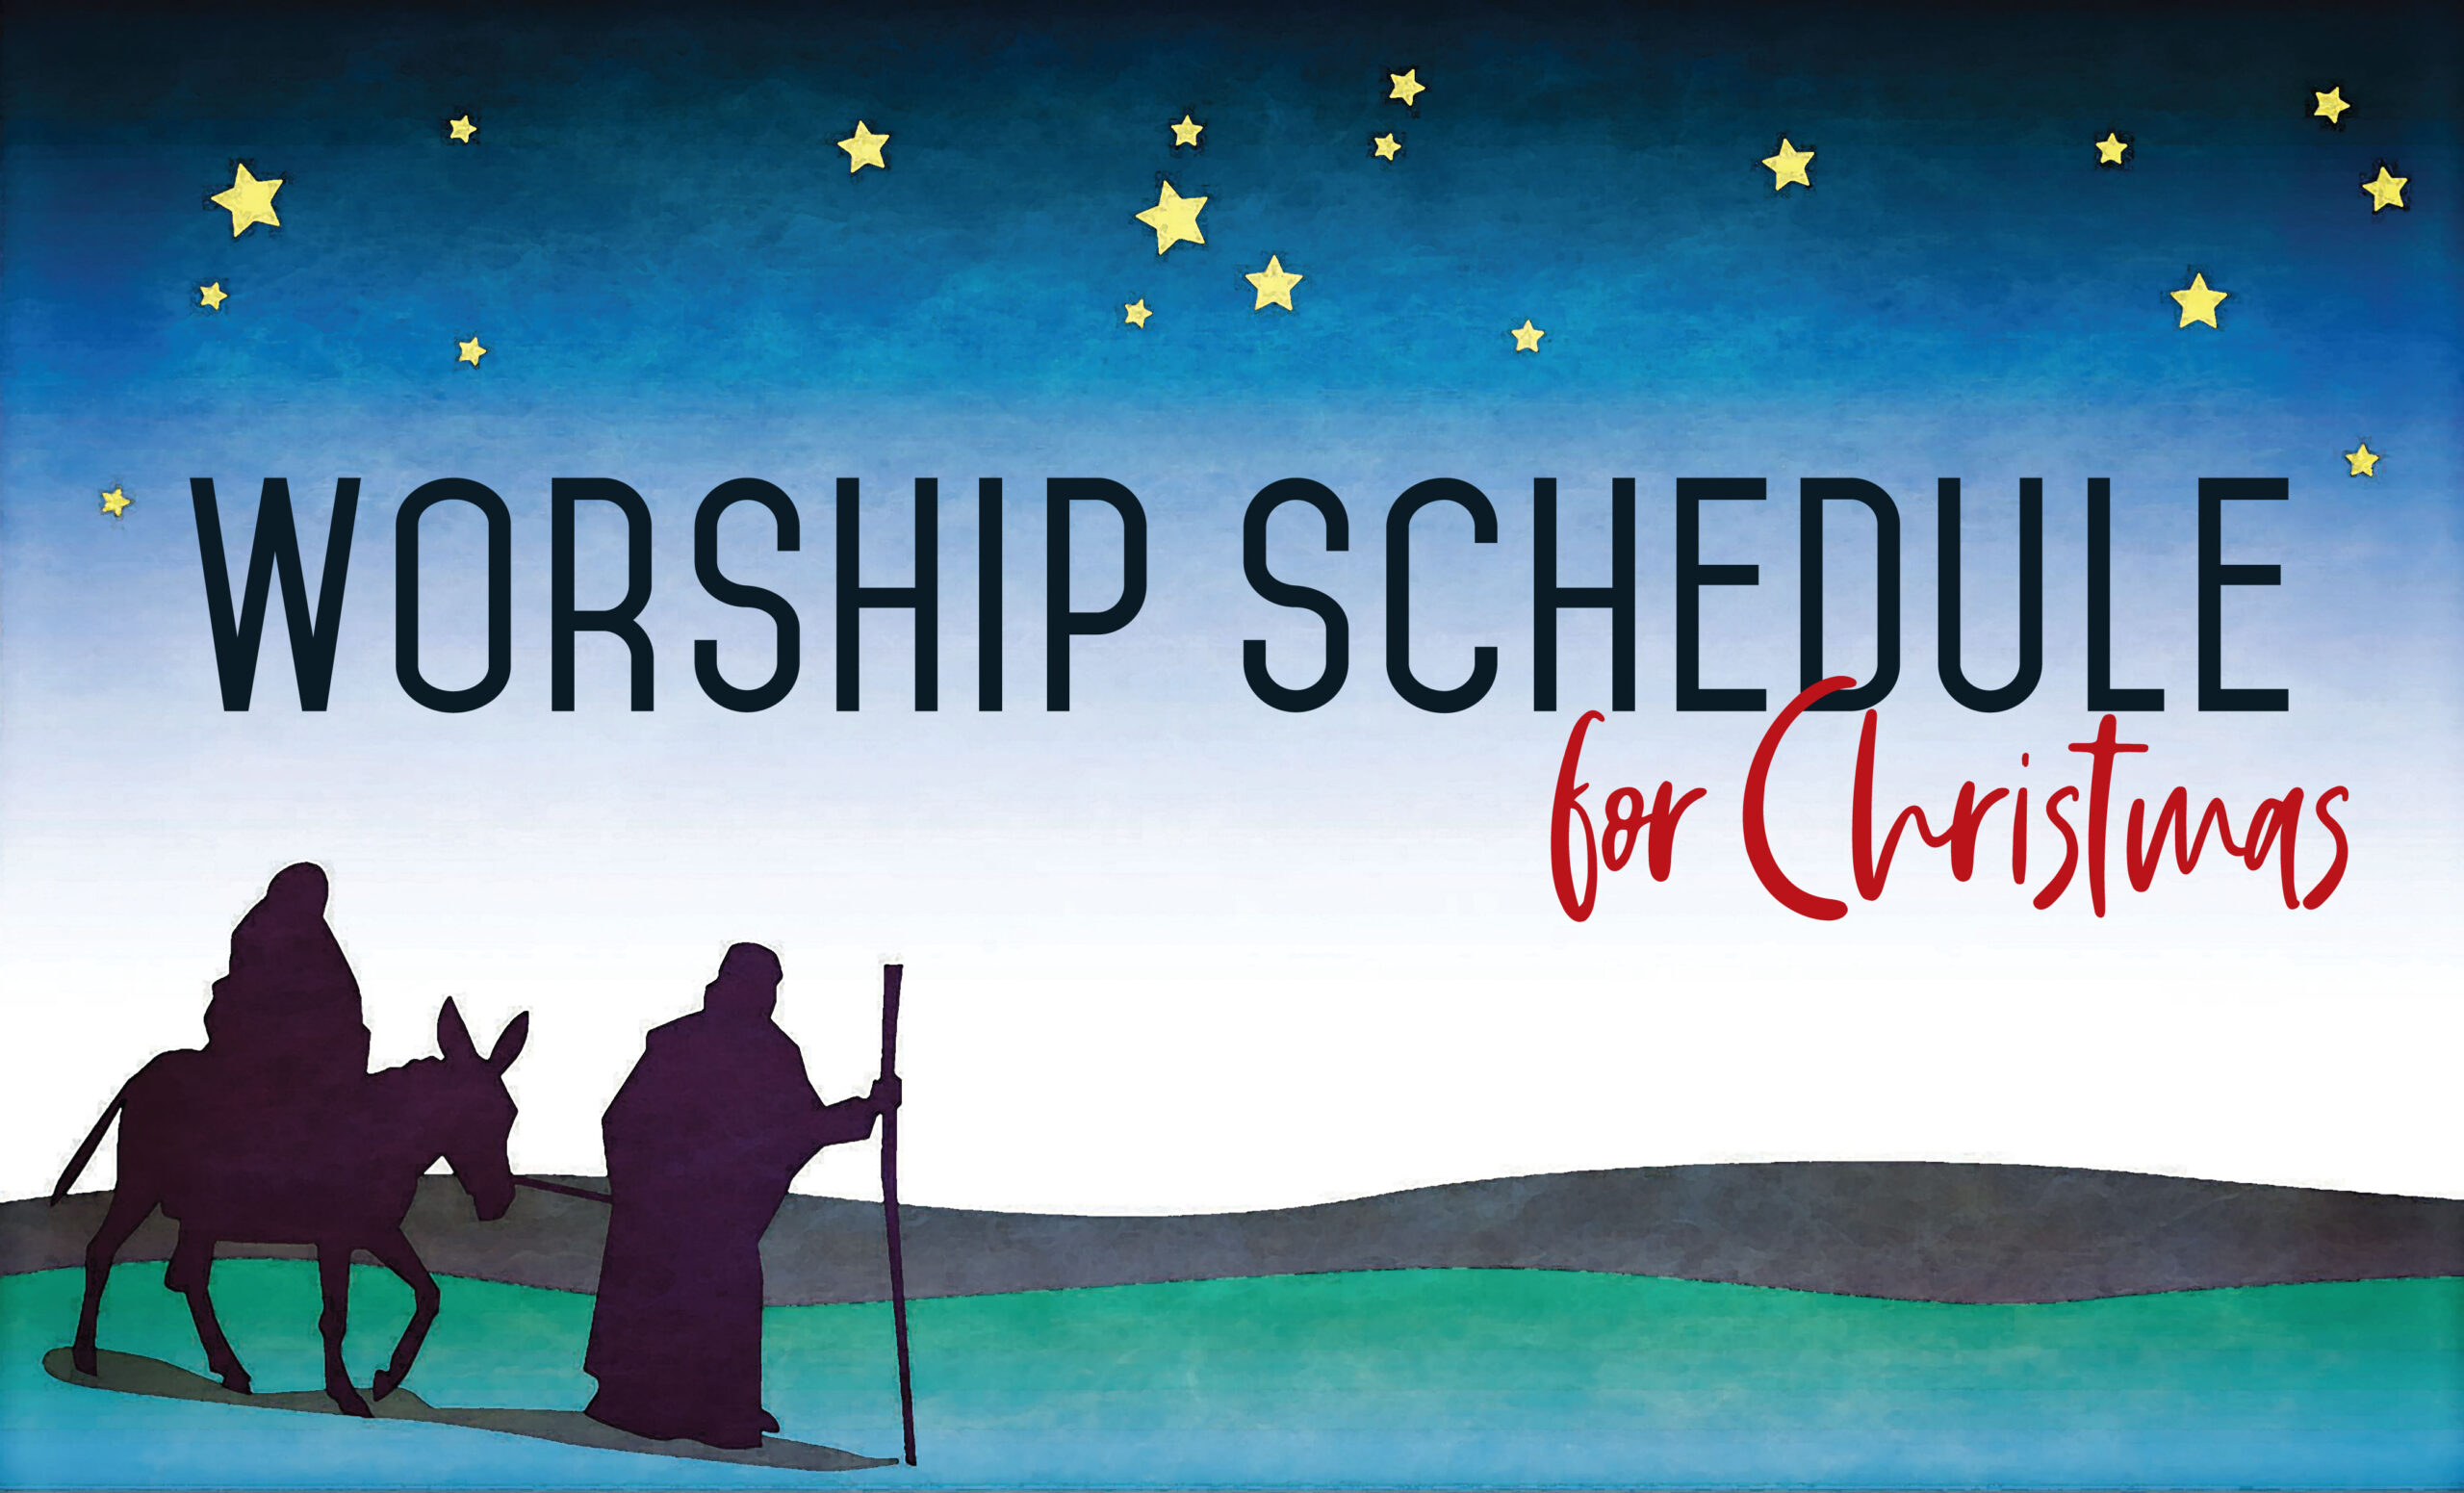 Our Christmas Worship Schedule